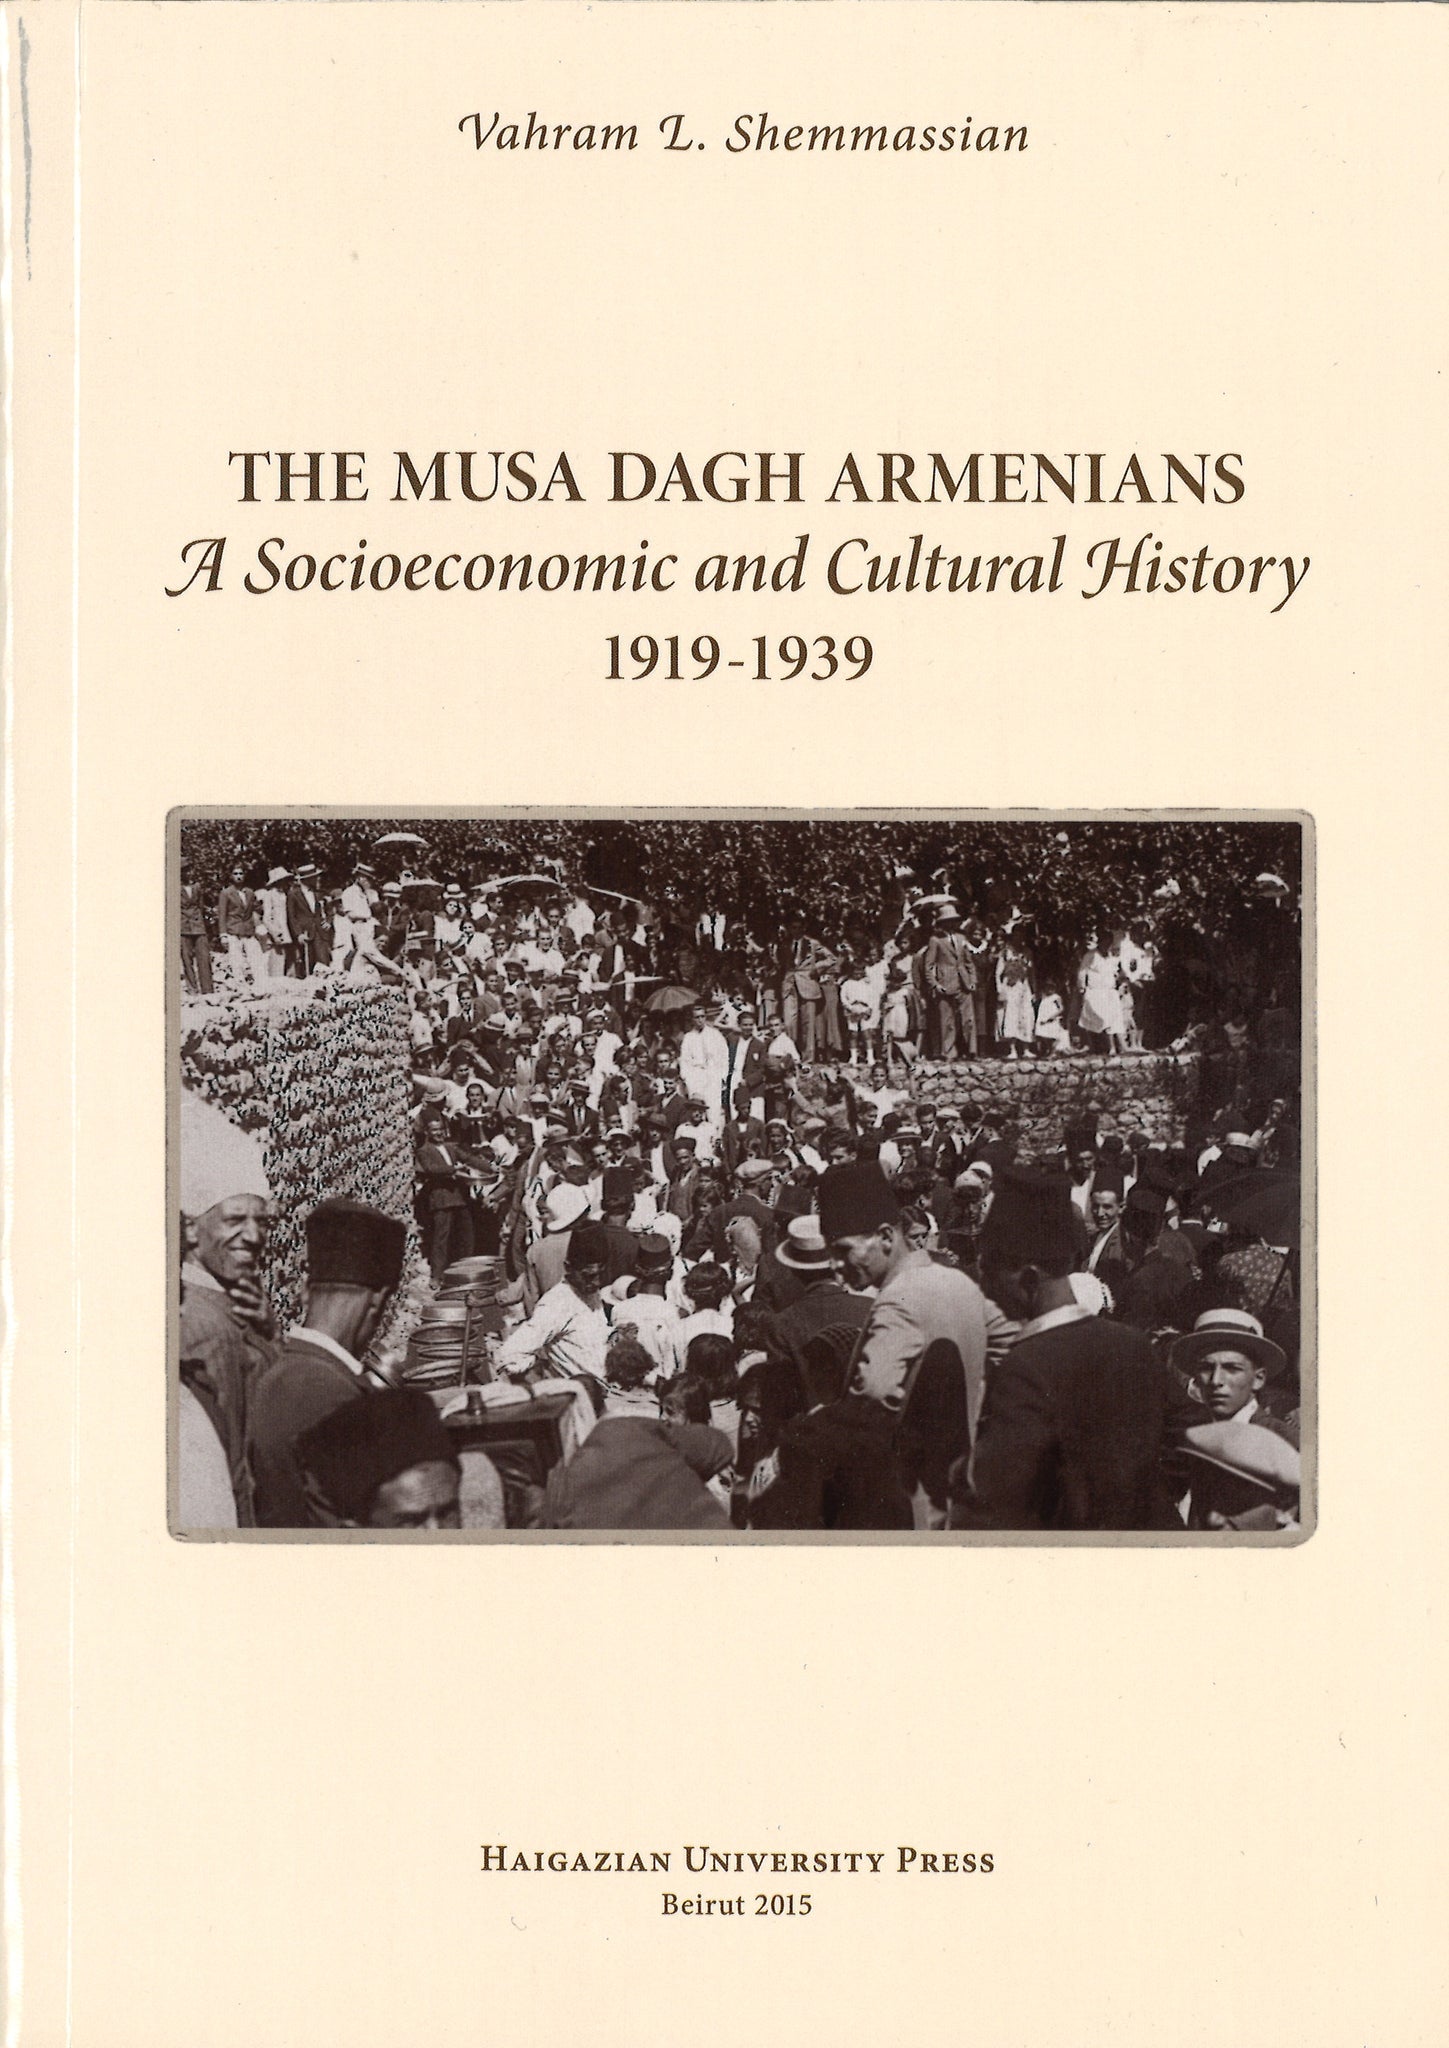 MUSA DAGH ARMENIANS, THE ~ A Socioeconomic and Cultural History 1919-1939